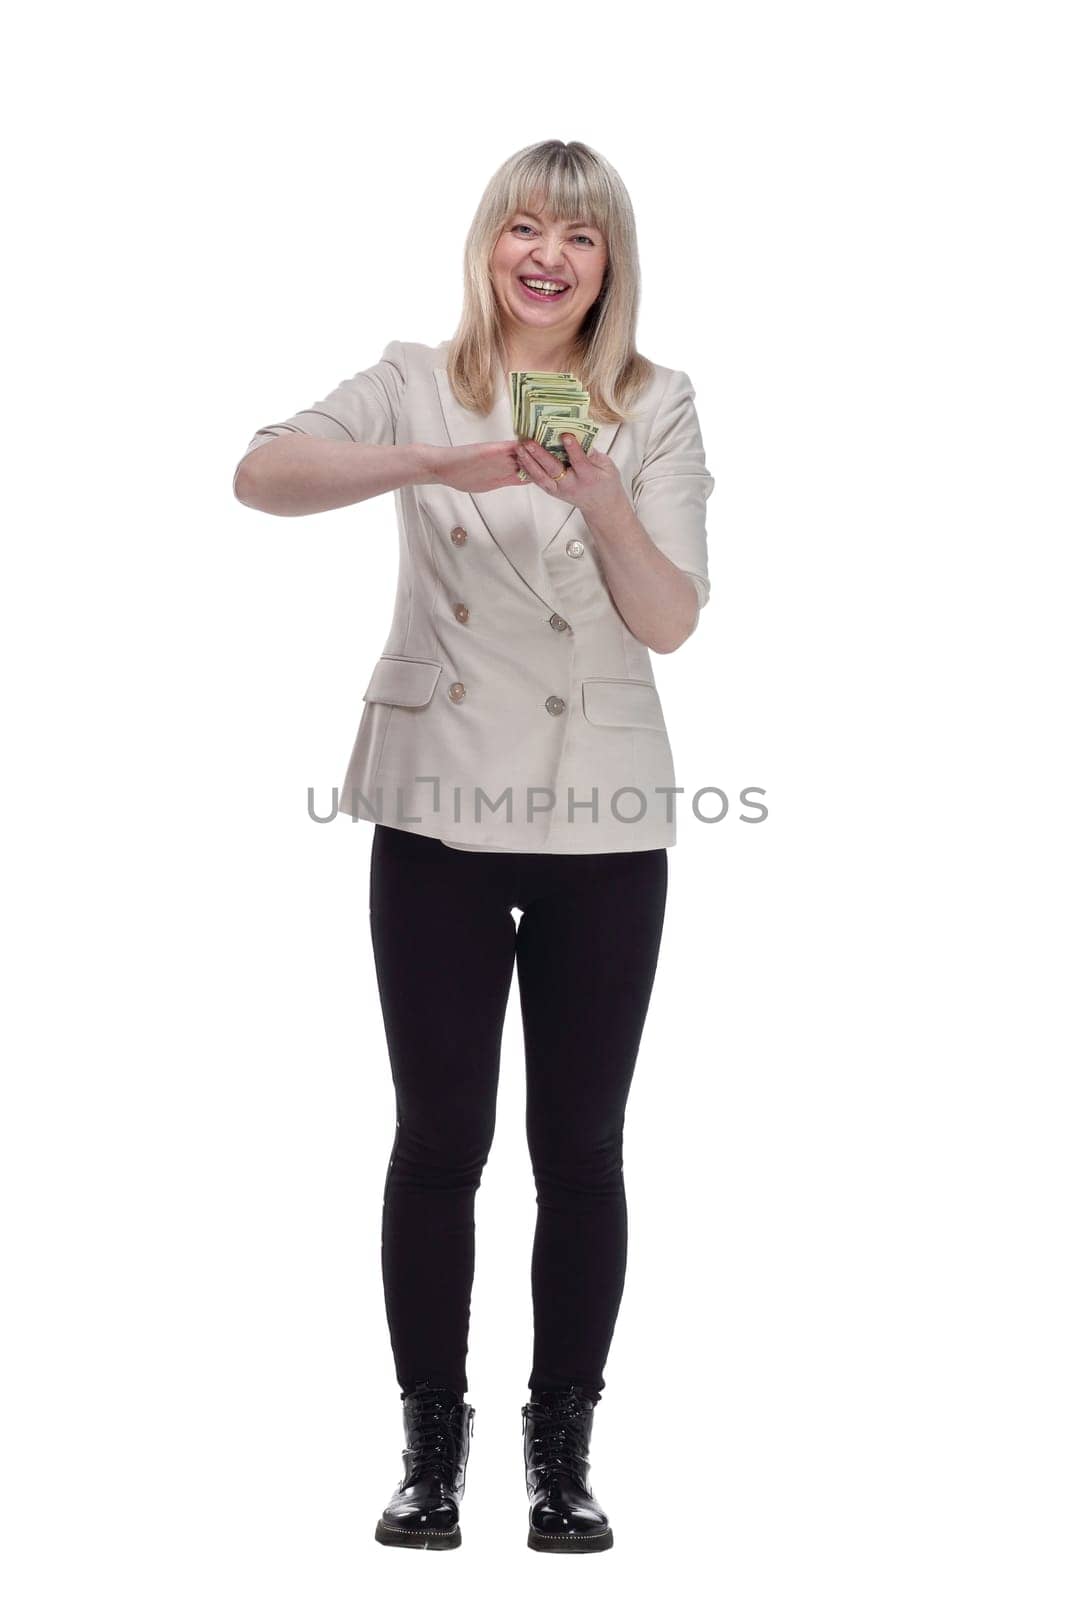 in full growth. very happy woman scattering a bundle of dollar bills. isolated on a white background.